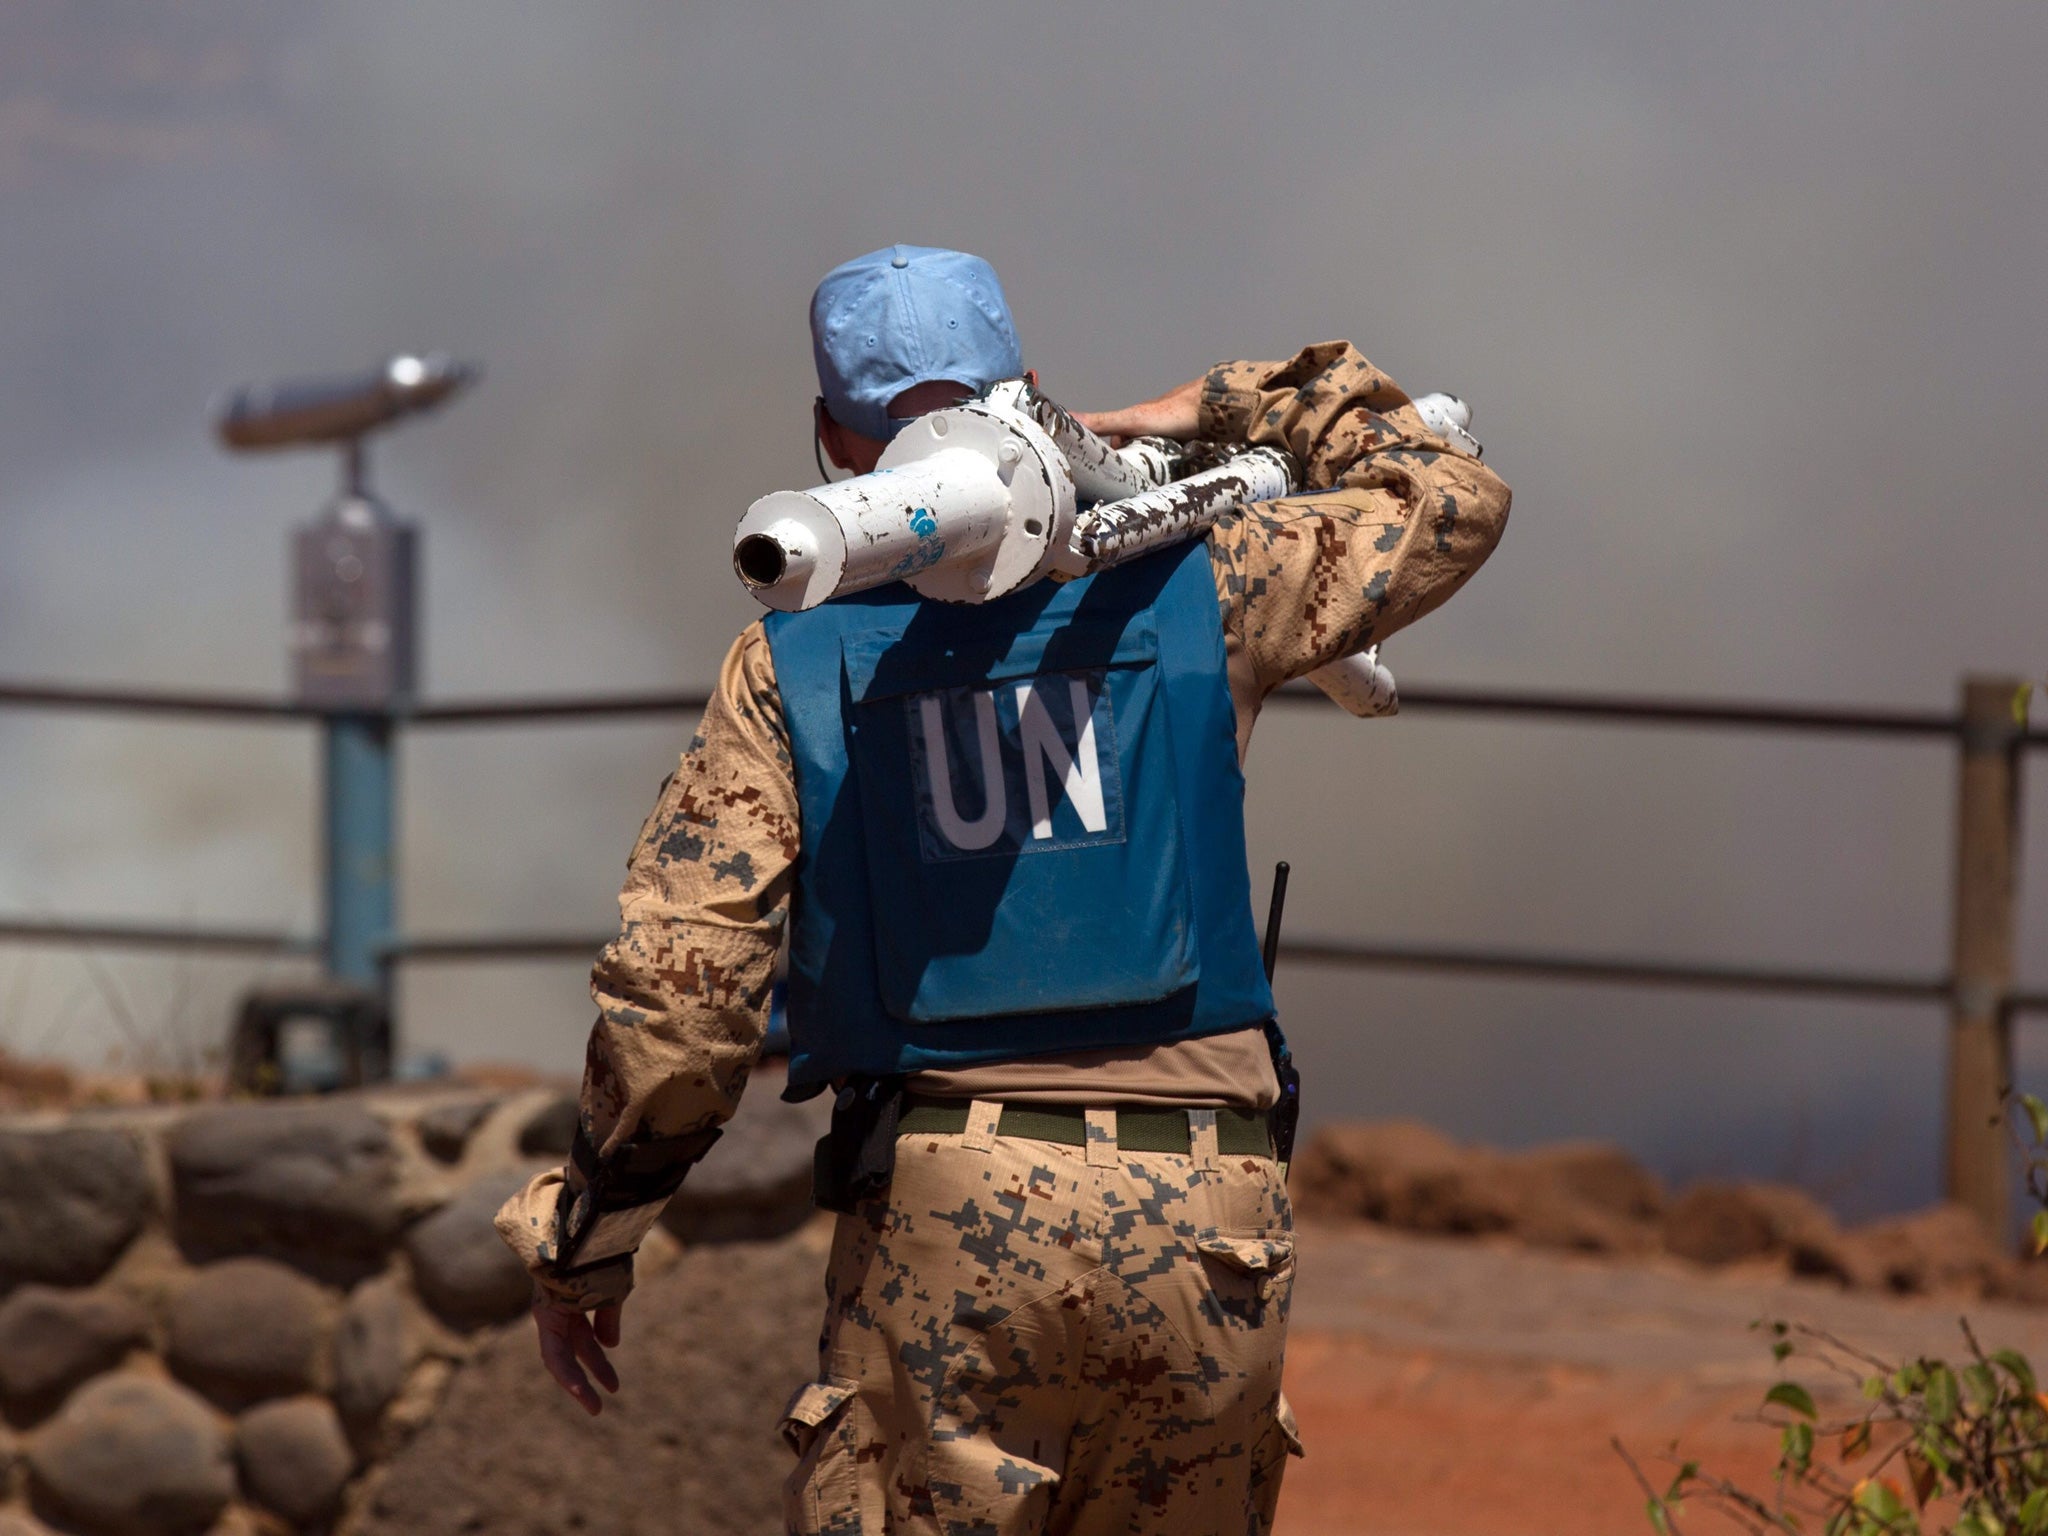 A UN peacekeeper operating at the Syrian-Israeli border